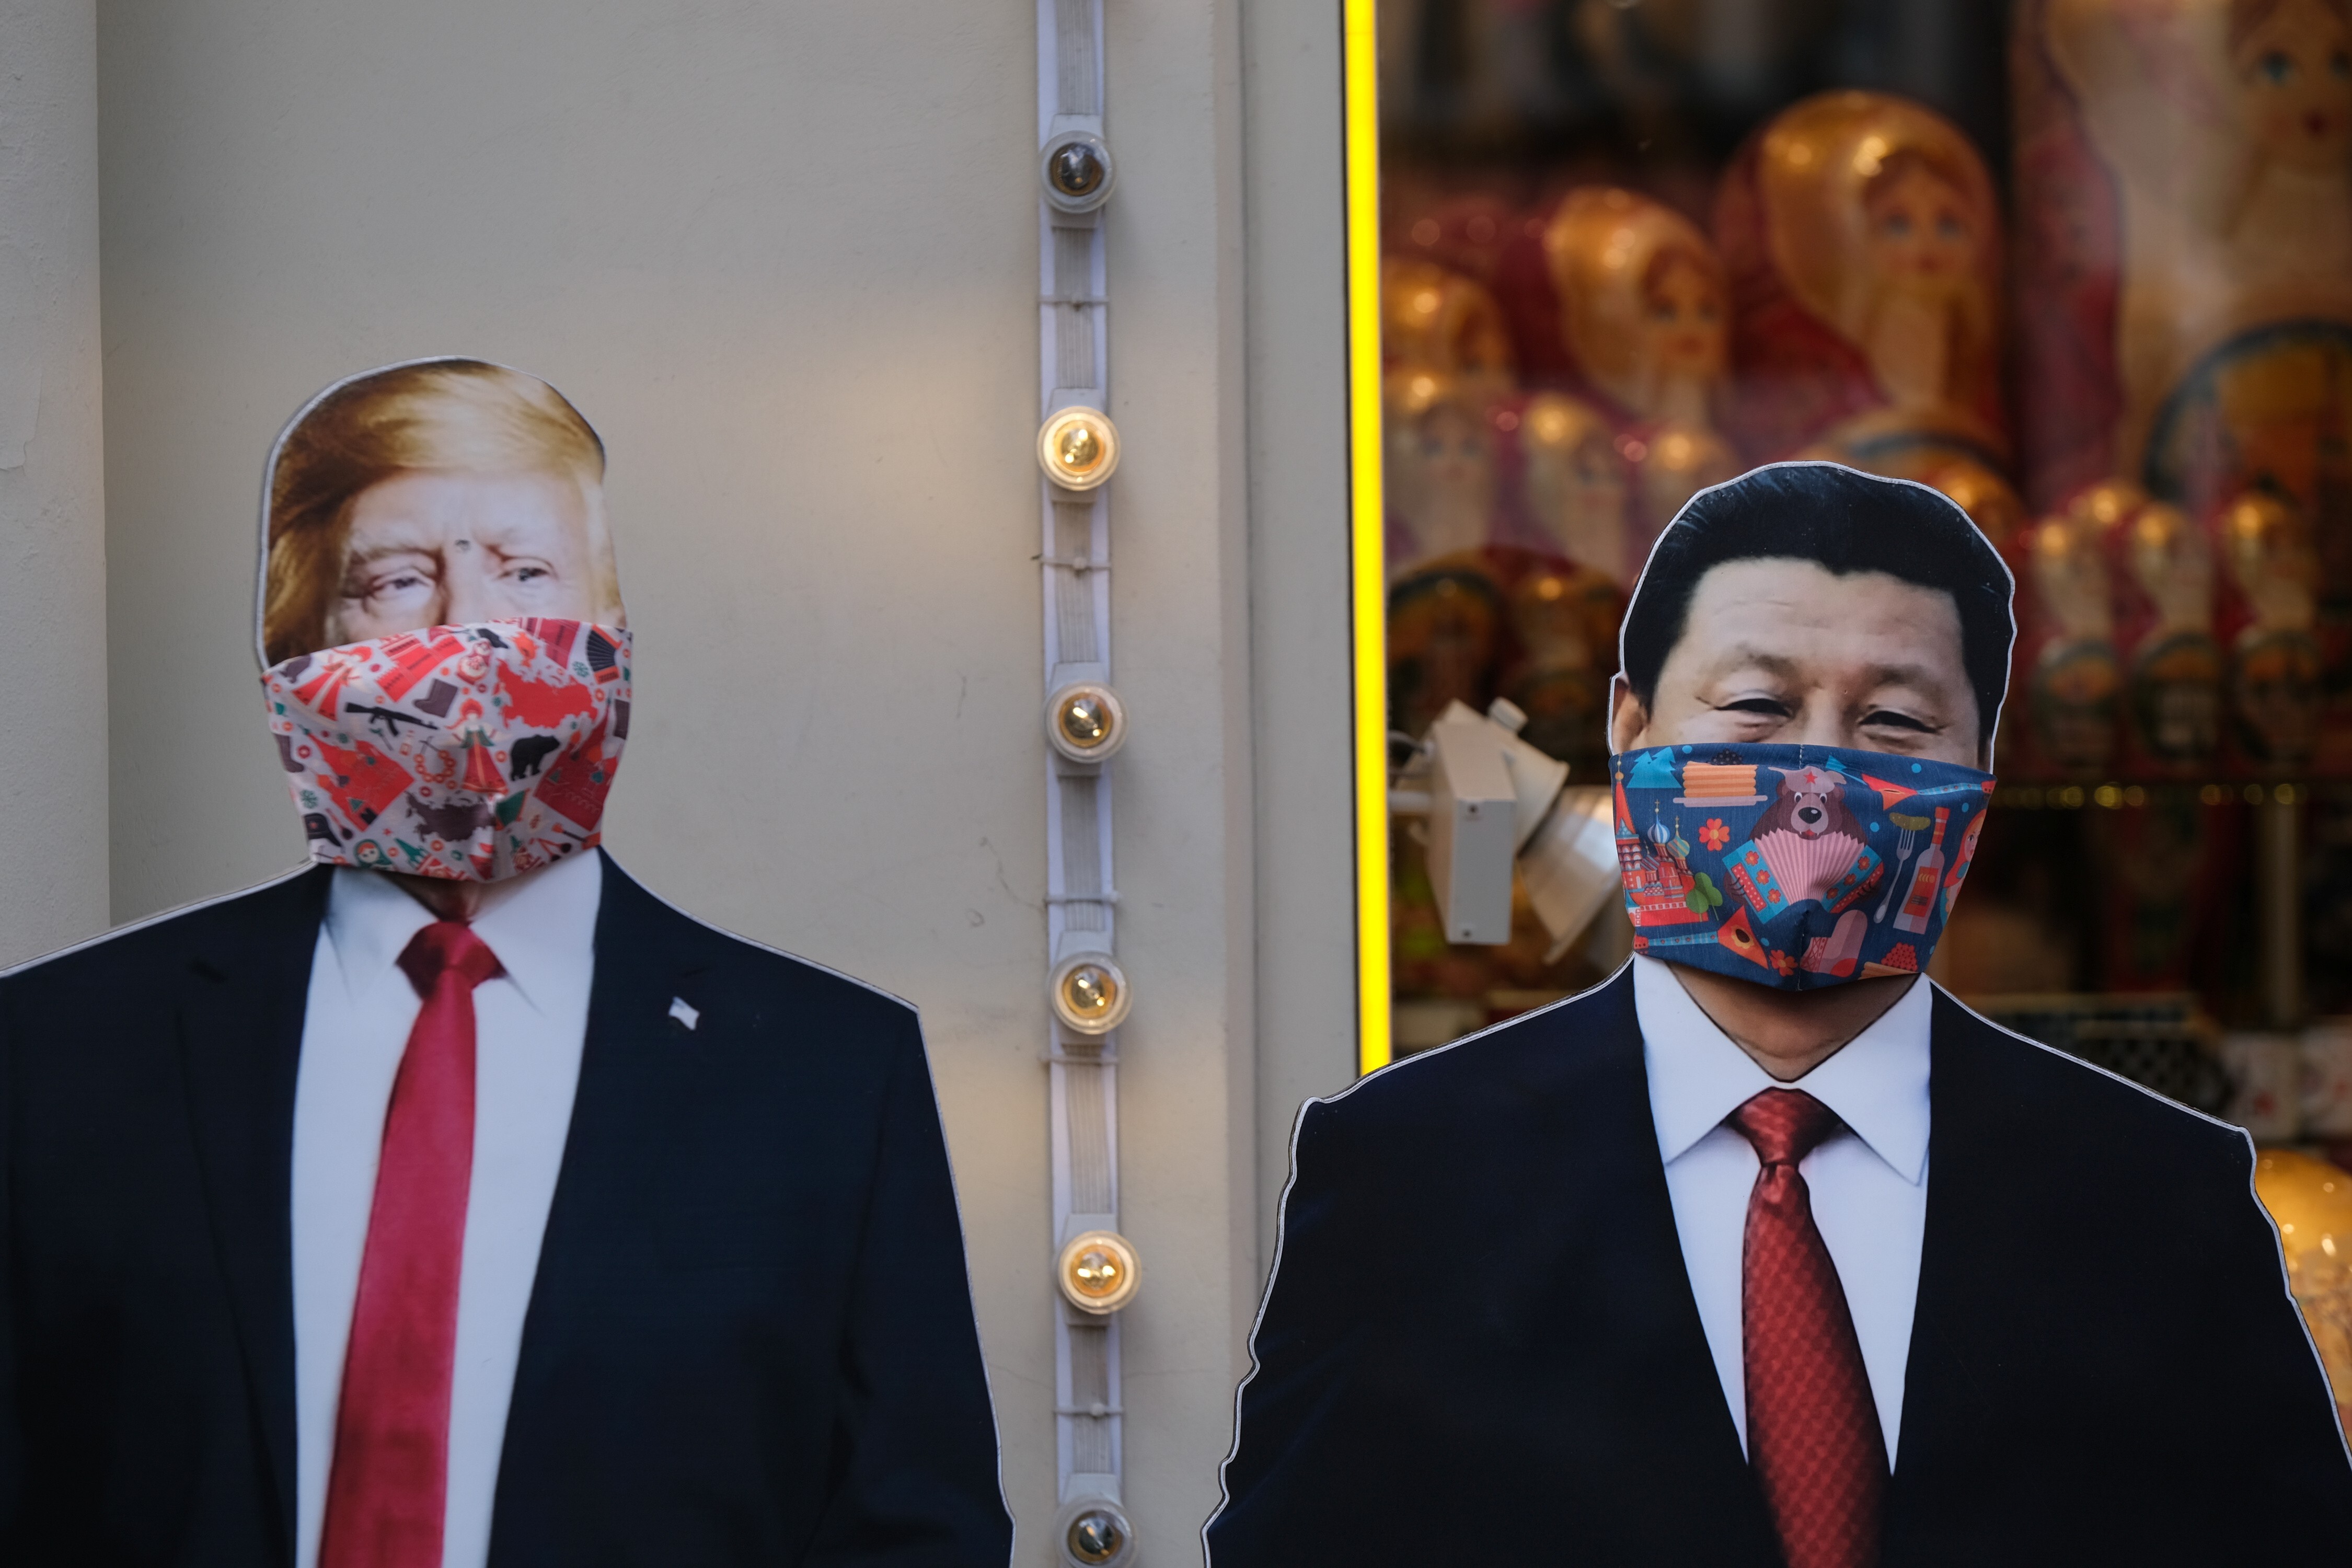 Cardboard cut-outs of US President Donald Trump and Chinese President Xi Jinping wearing face masks stand outside a gift shop in Moscow on March 23. The US has said China is suppressing information related to Covid-19, while China says the US is stigmatising its efforts. Photo: Reuters